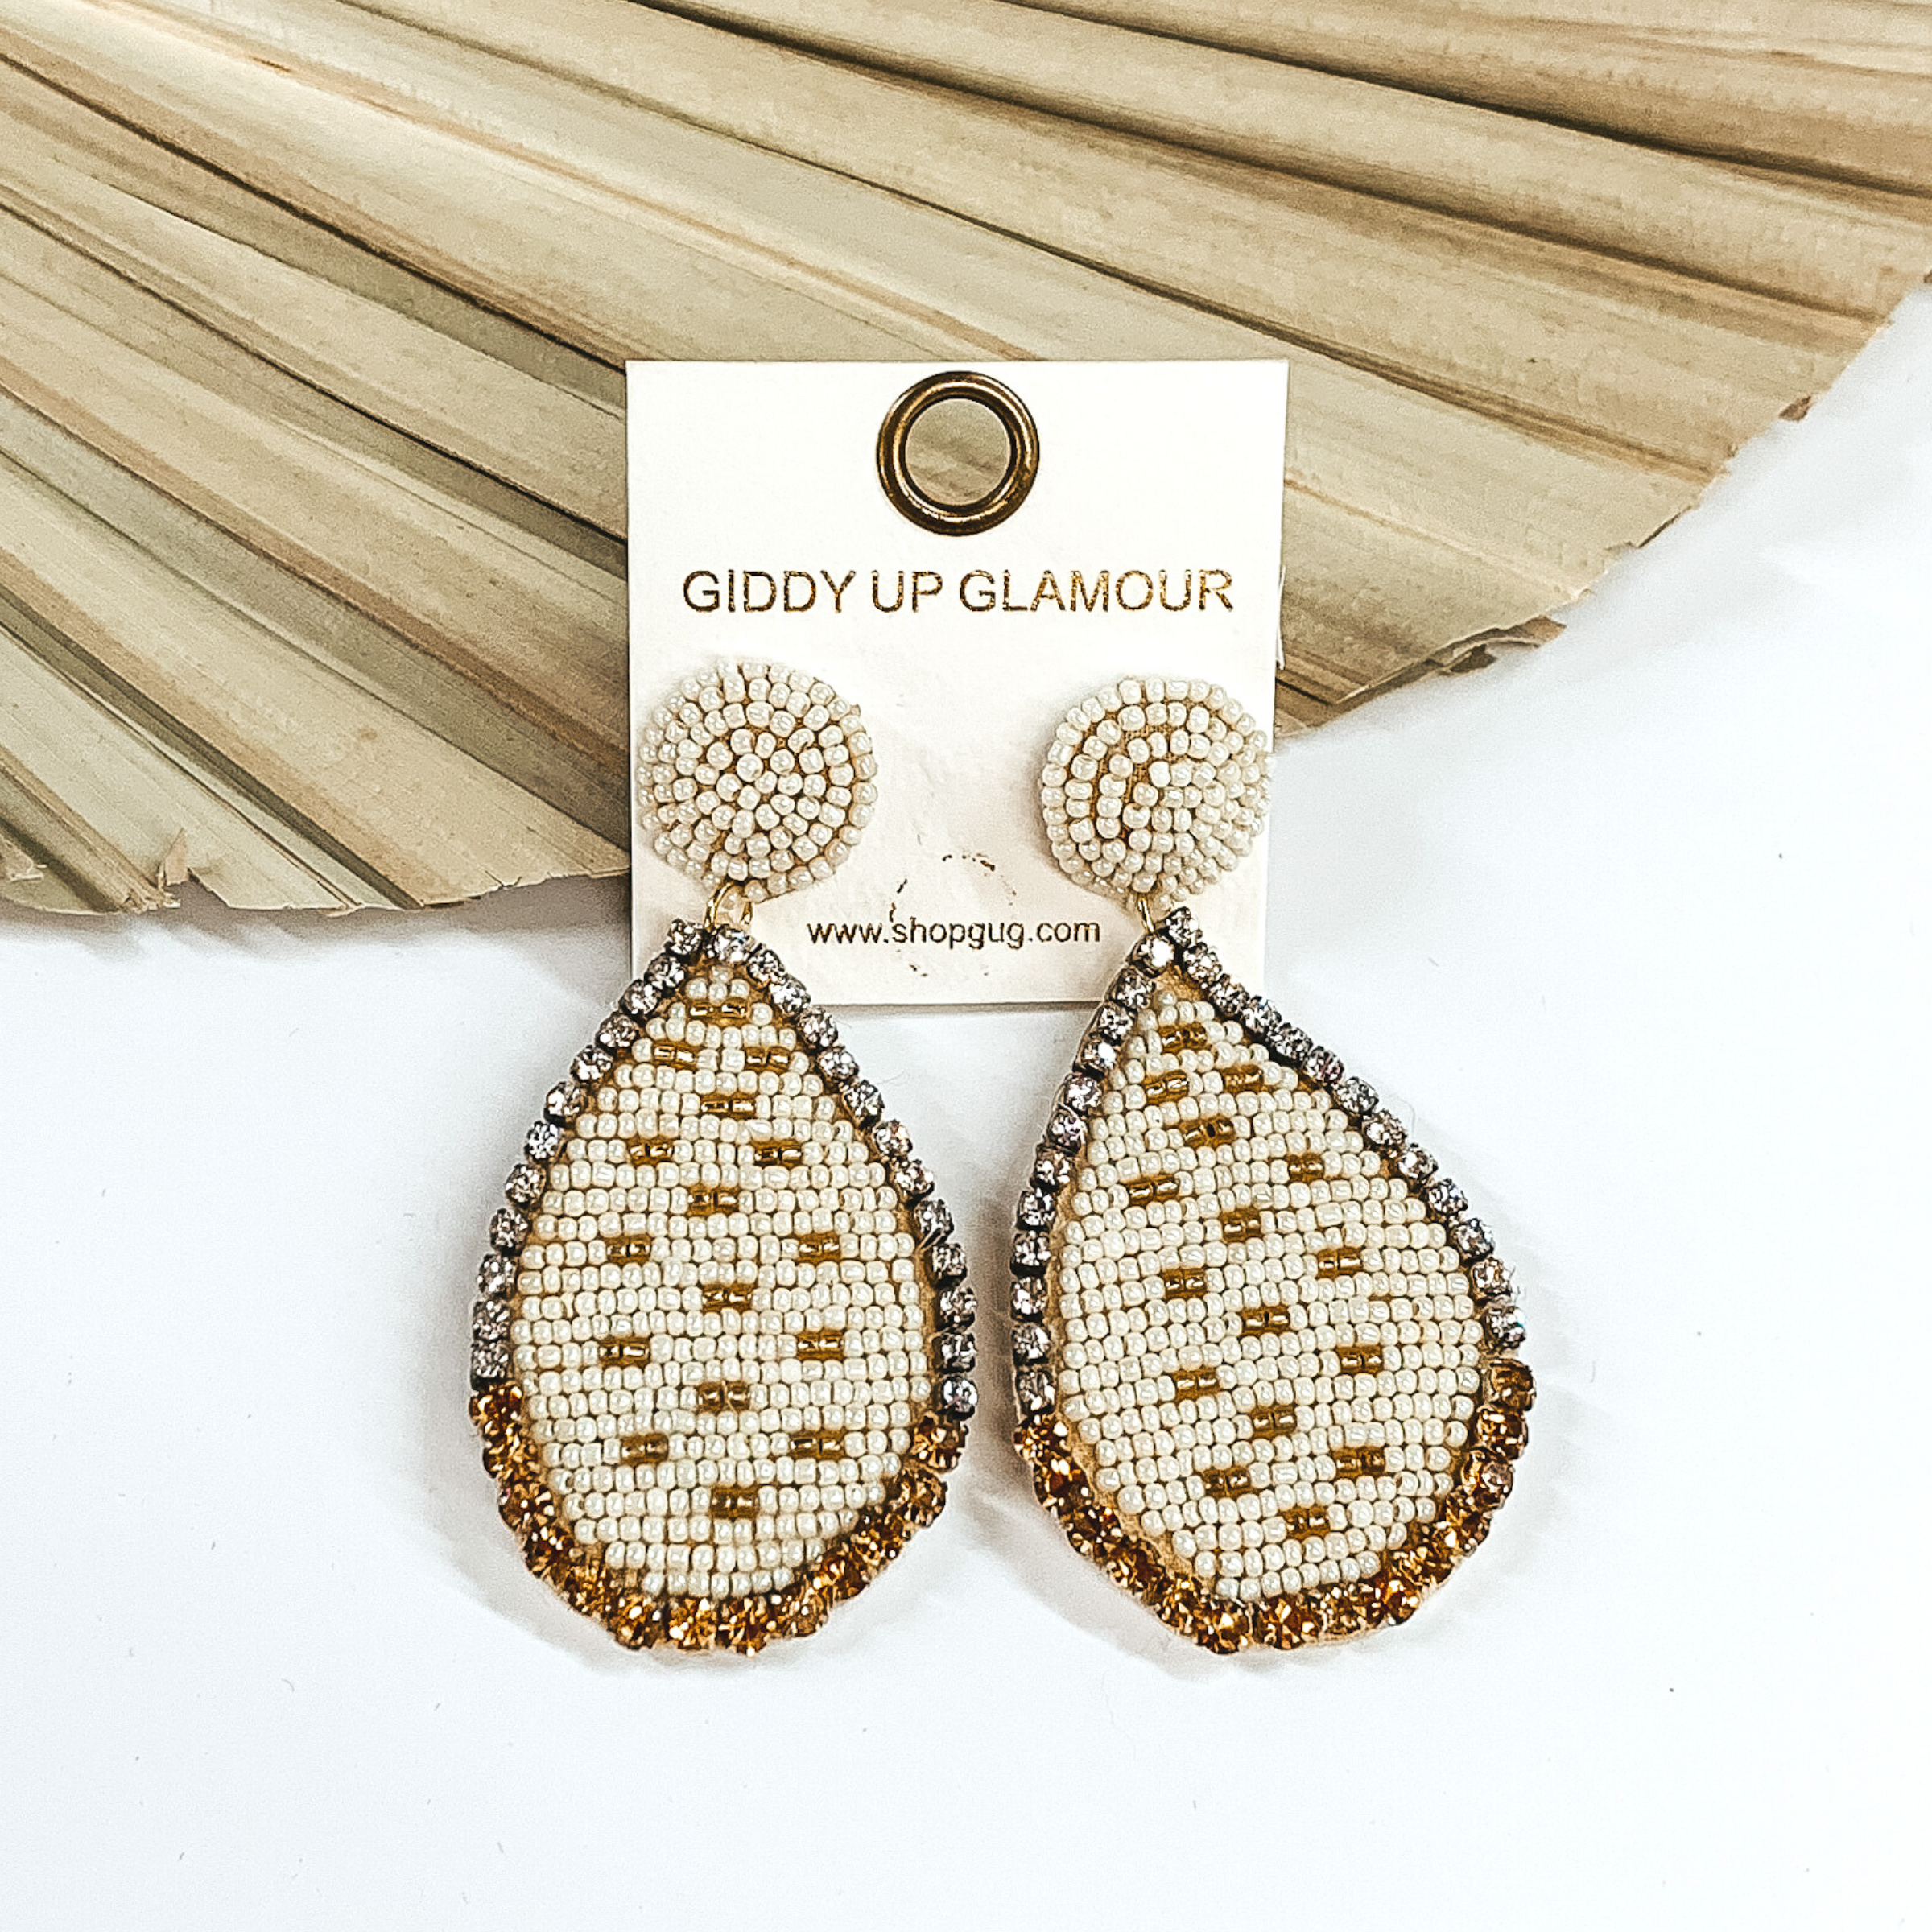 These earrings have a beaded circle stud with a hanging beaded teardrop pendant. The pendant is covered with ivory beads with gold beads spread throughout evenly. The teardrop pendant is outlined hald with clear crystals and half in gold crystals. These earrings are pictured in ront of a pale green leaf and on a white background. 